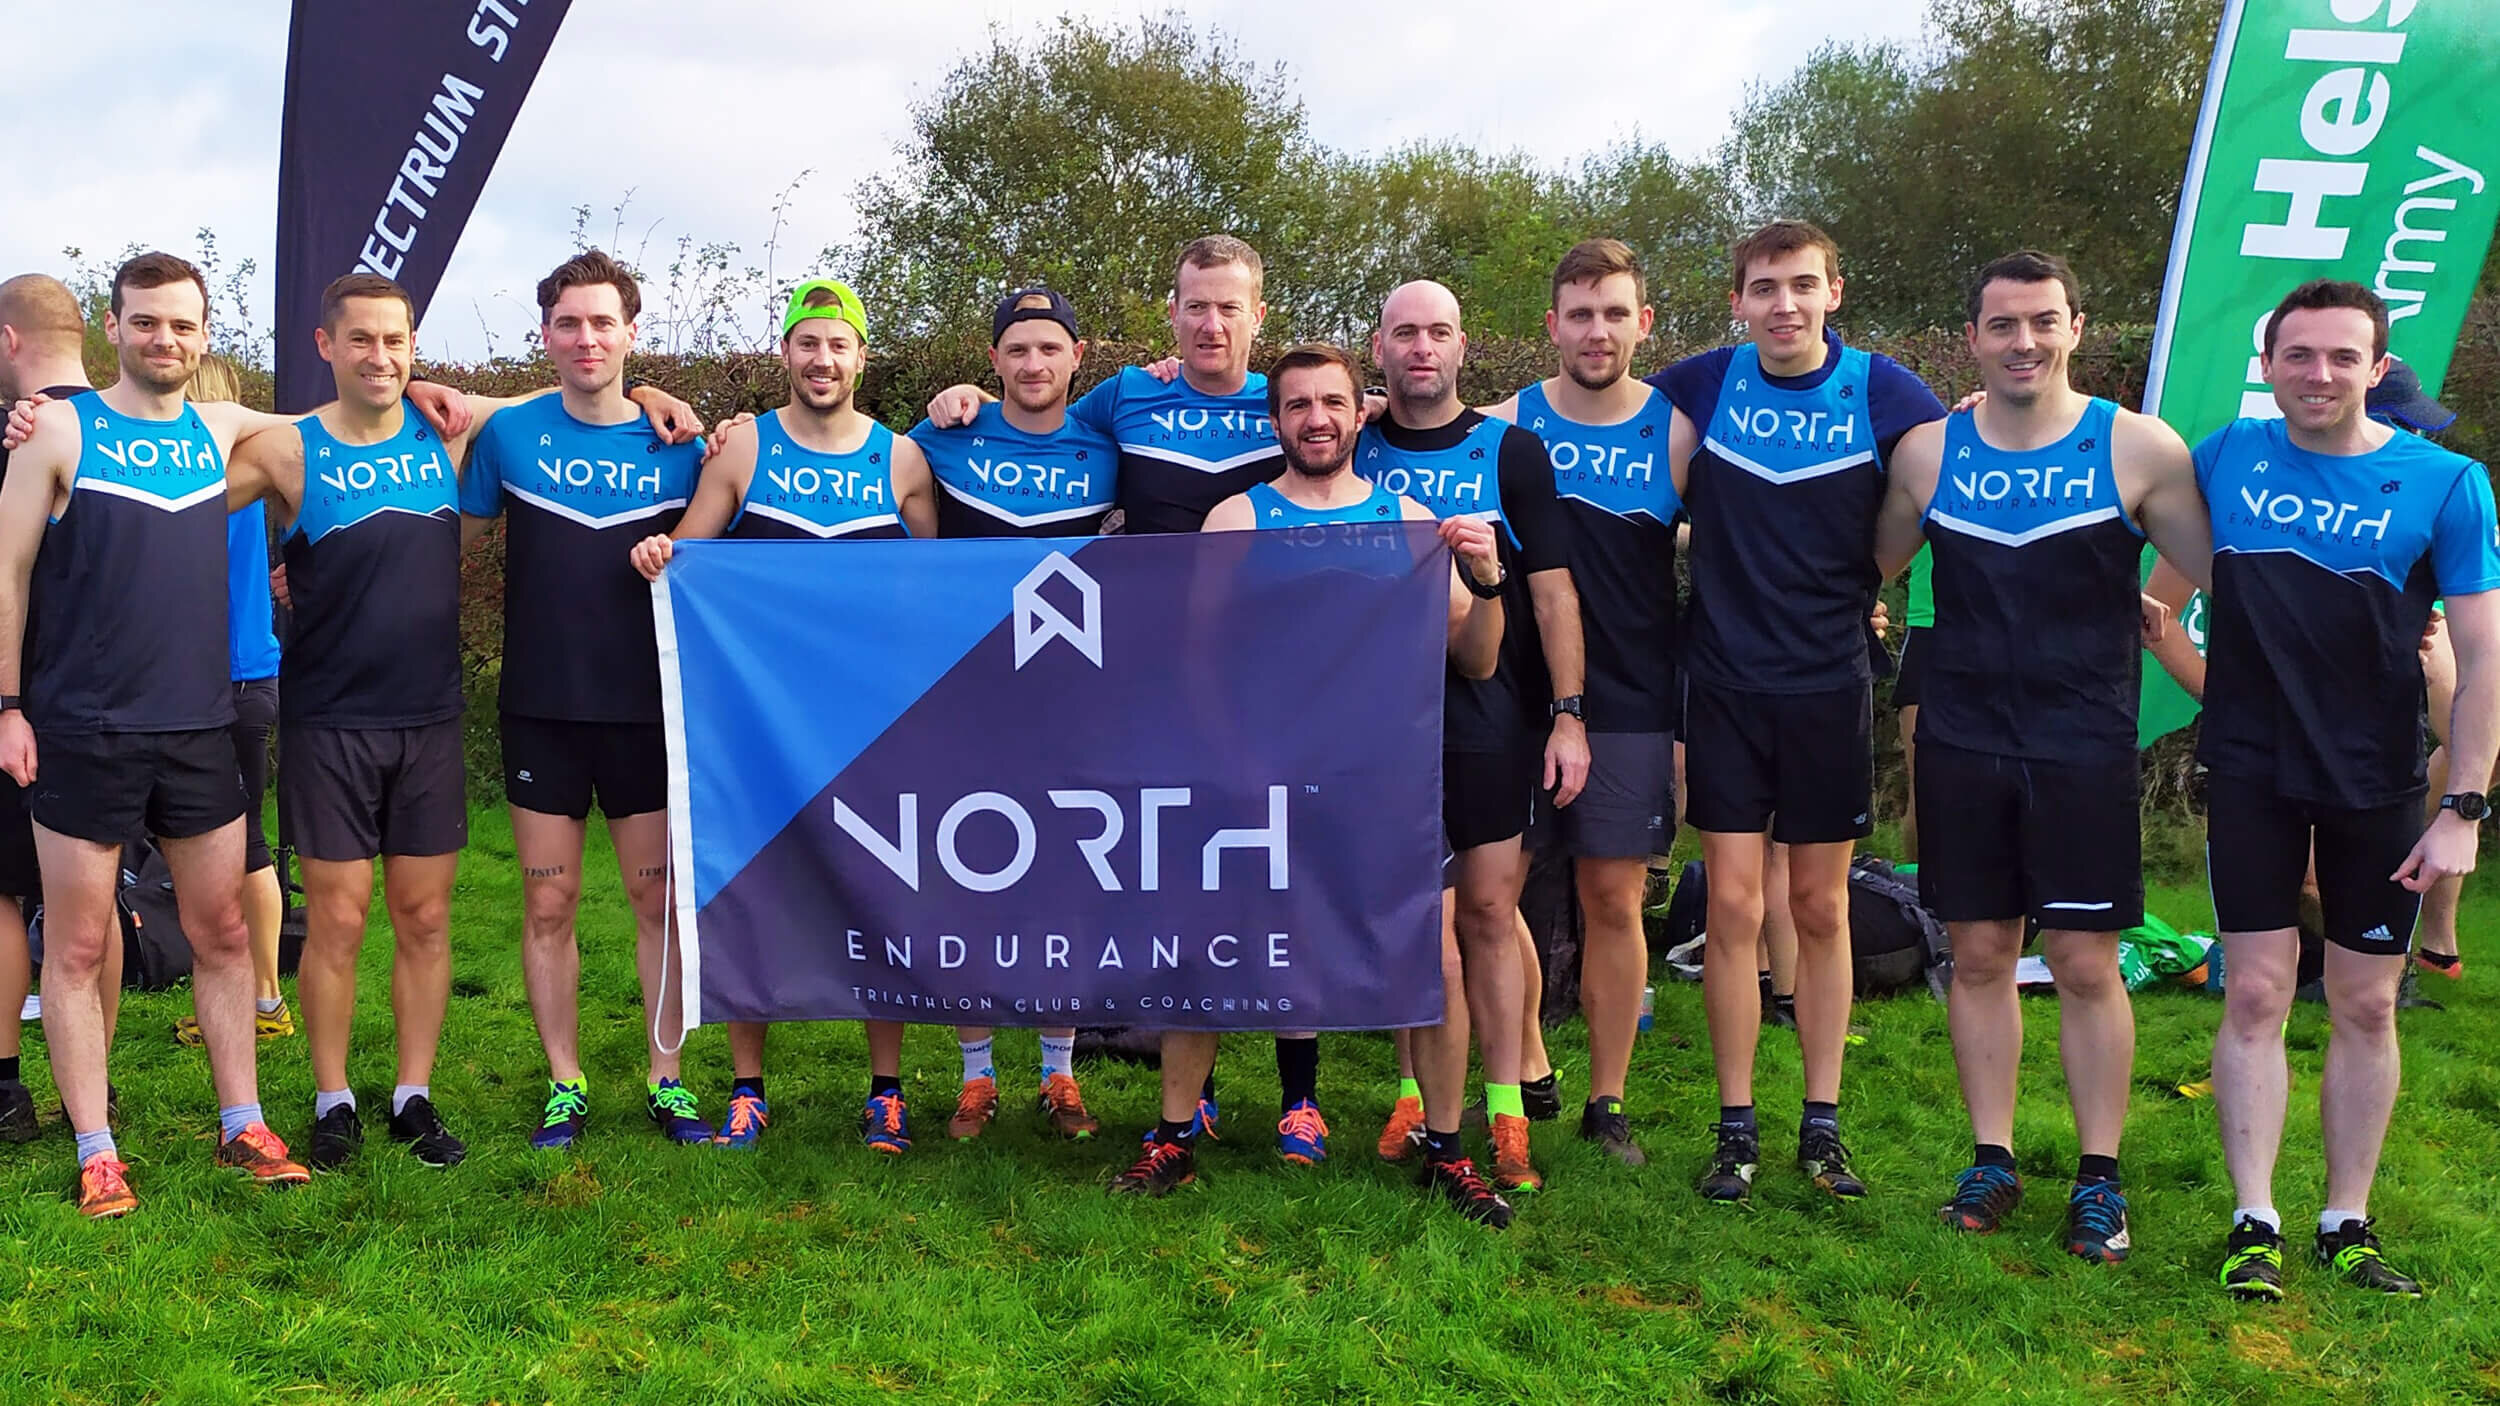 North Endurance Liverpool Cross Country